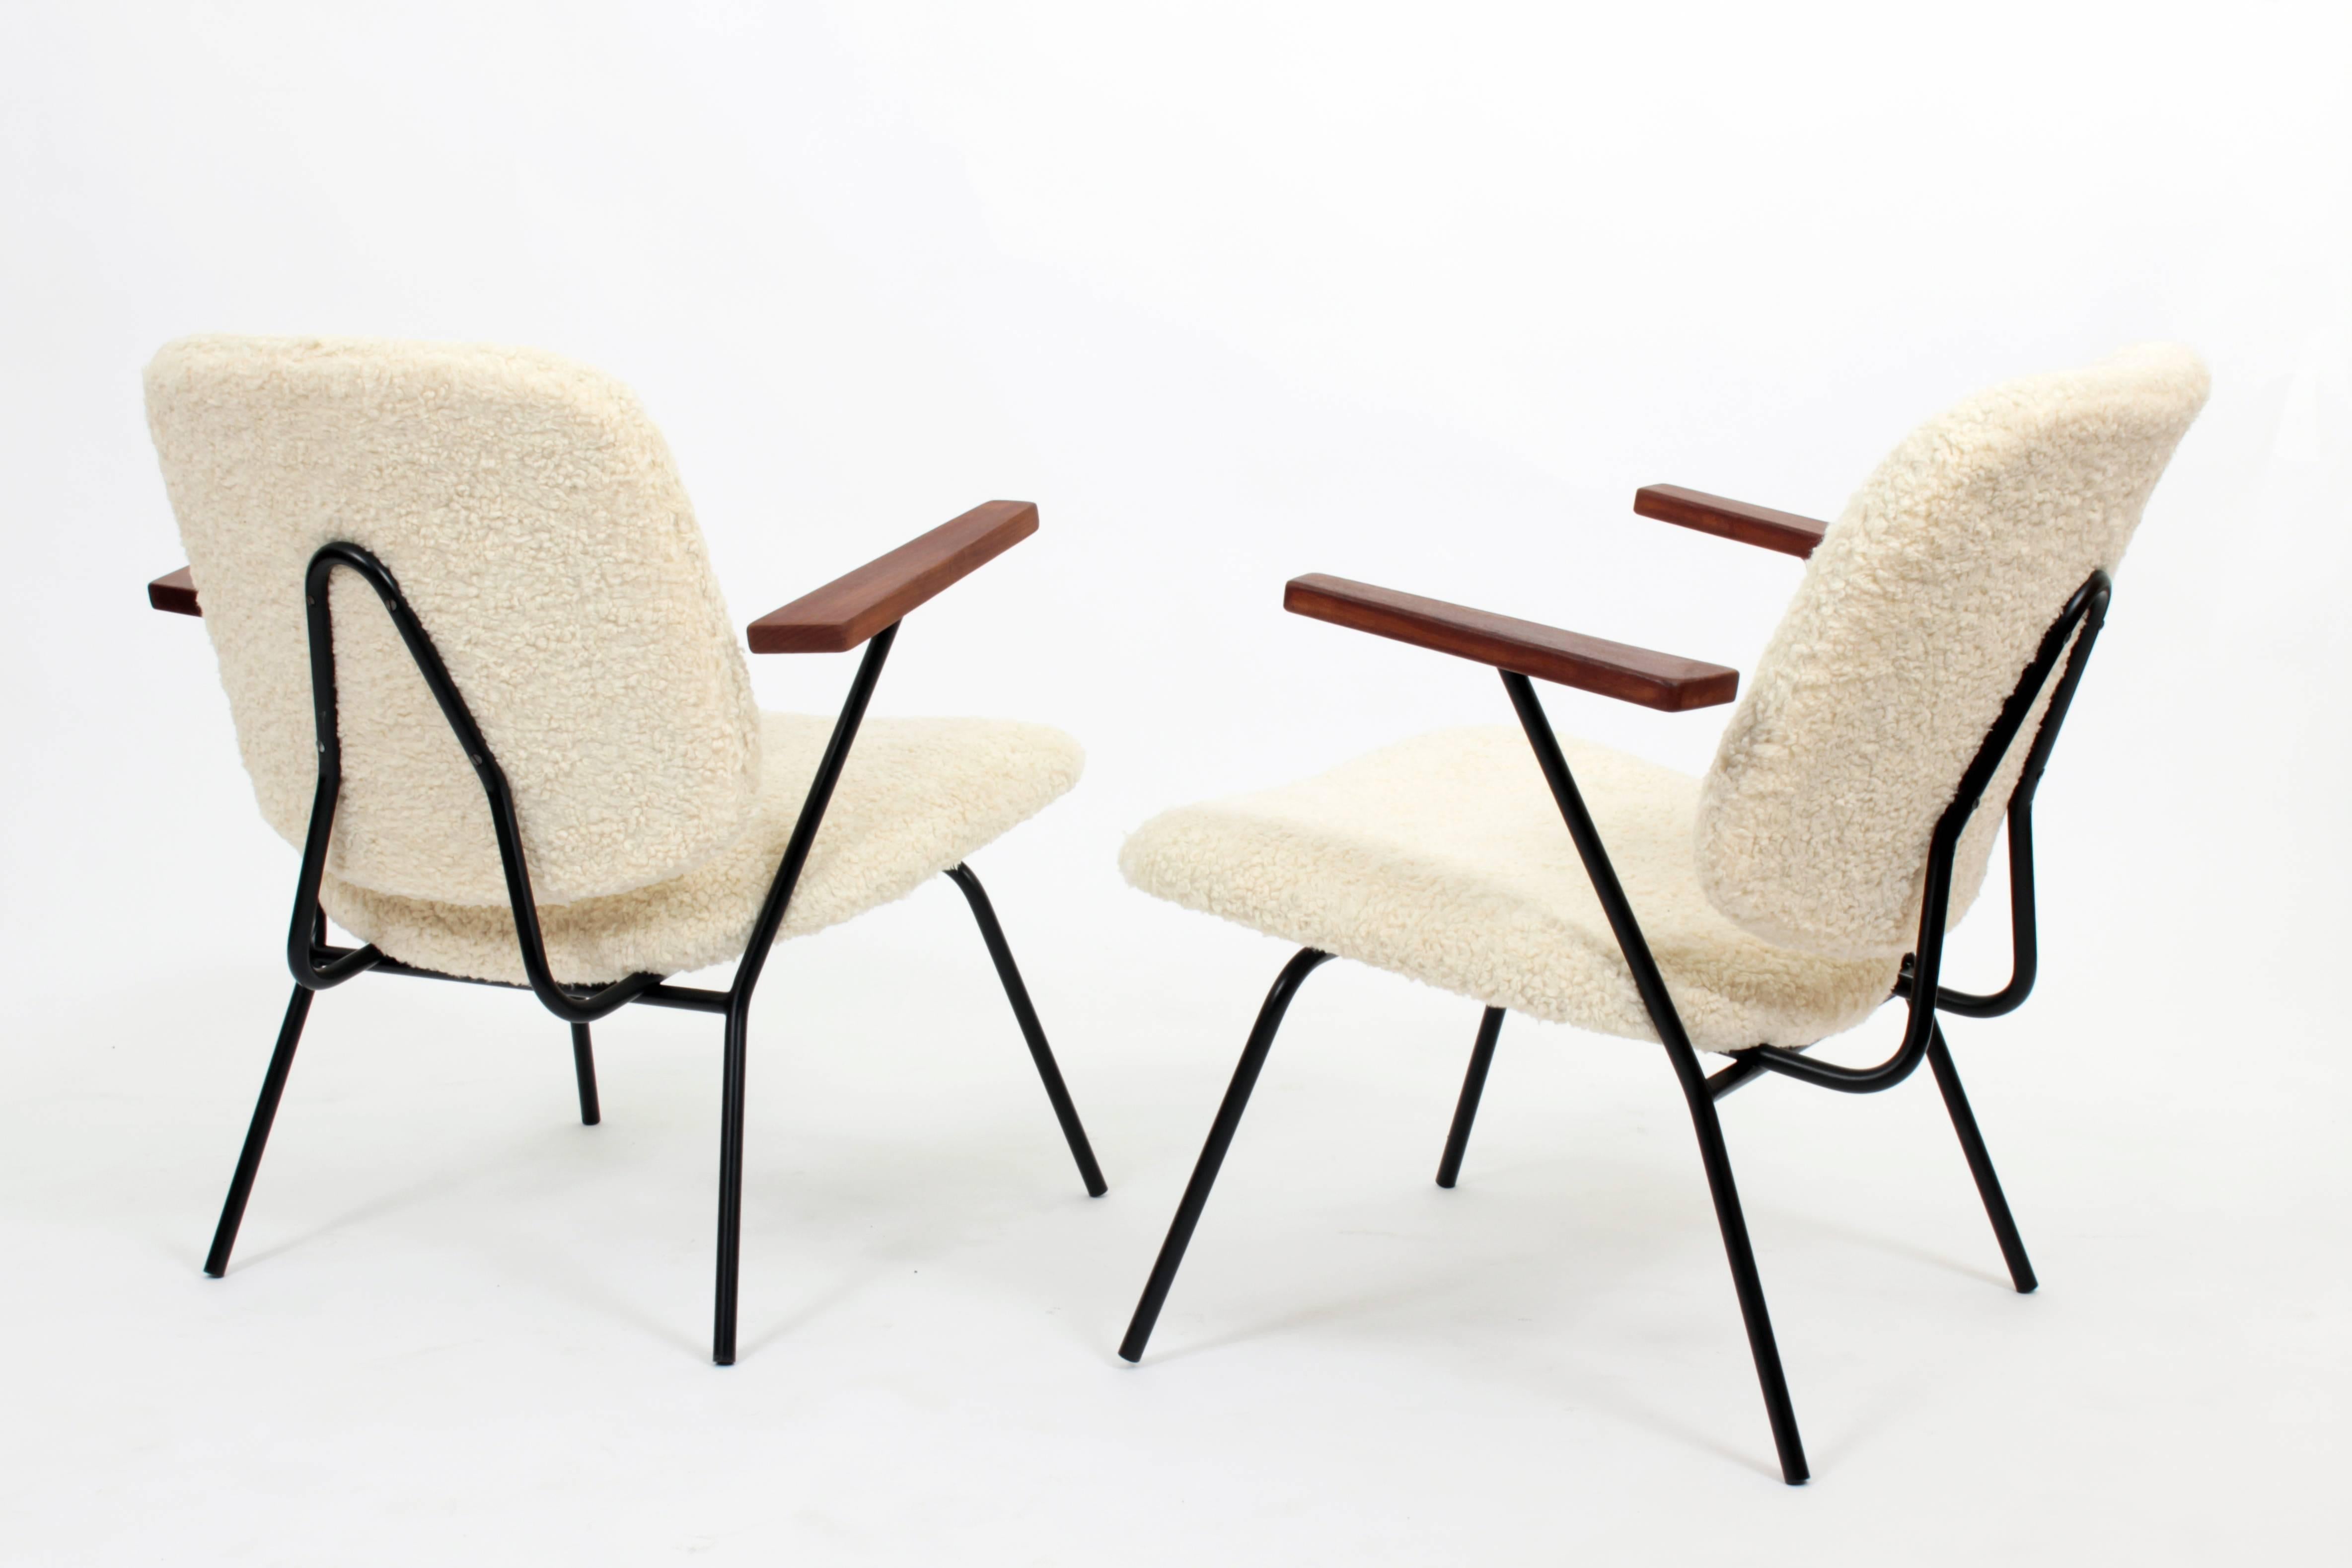 Dutch Pair of Armchairs by Wim Rietveldt and Willhelm Hendrik Gispen for Kembo, 1954